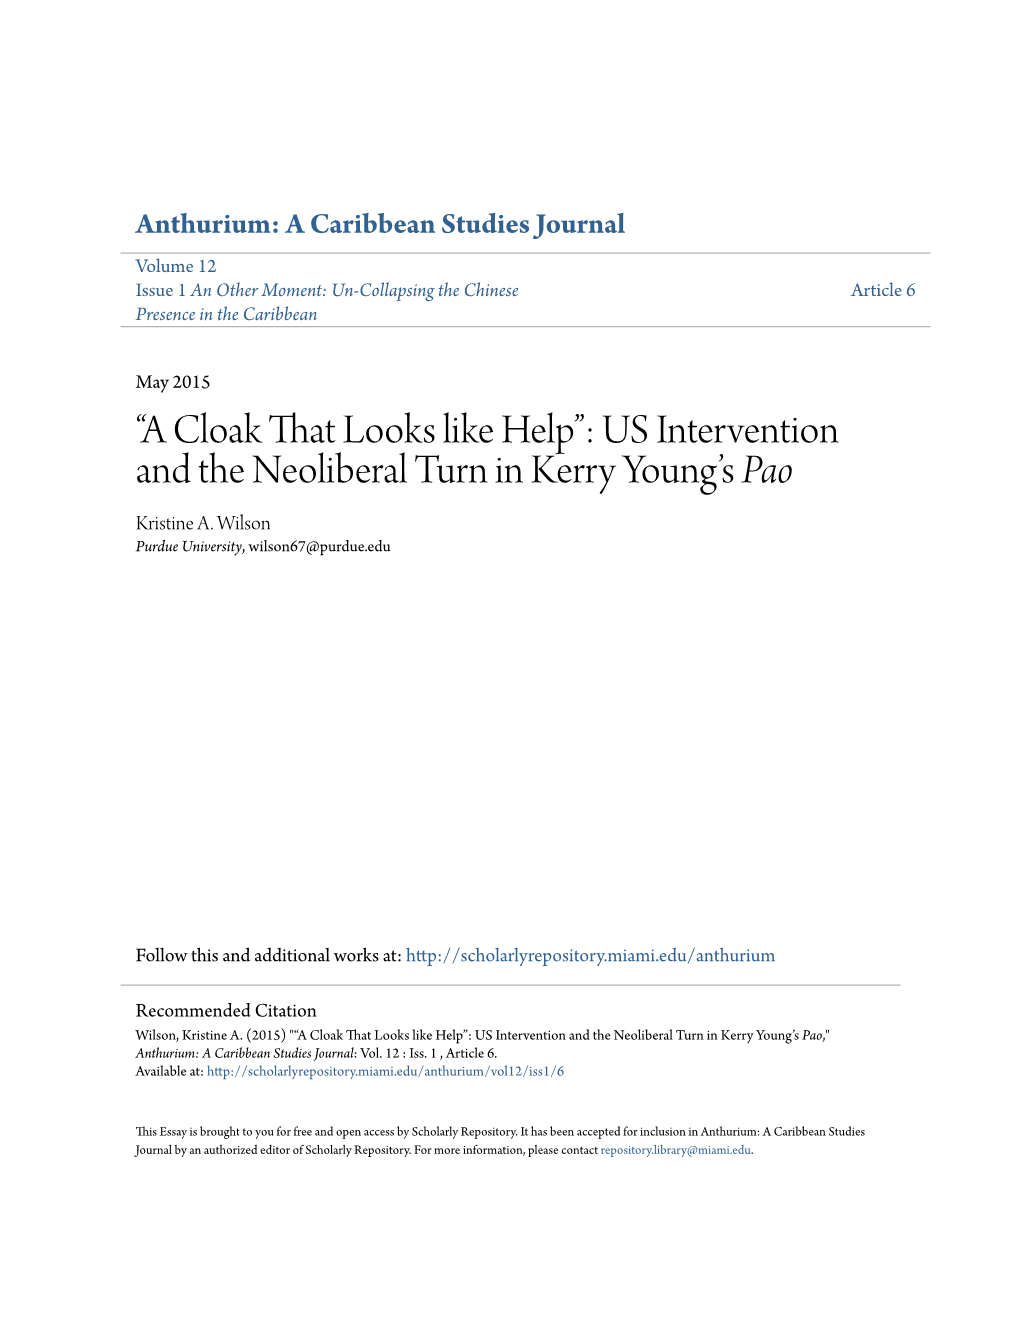 US Intervention and the Neoliberal Turn in Kerry Young’S Pao Kristine A